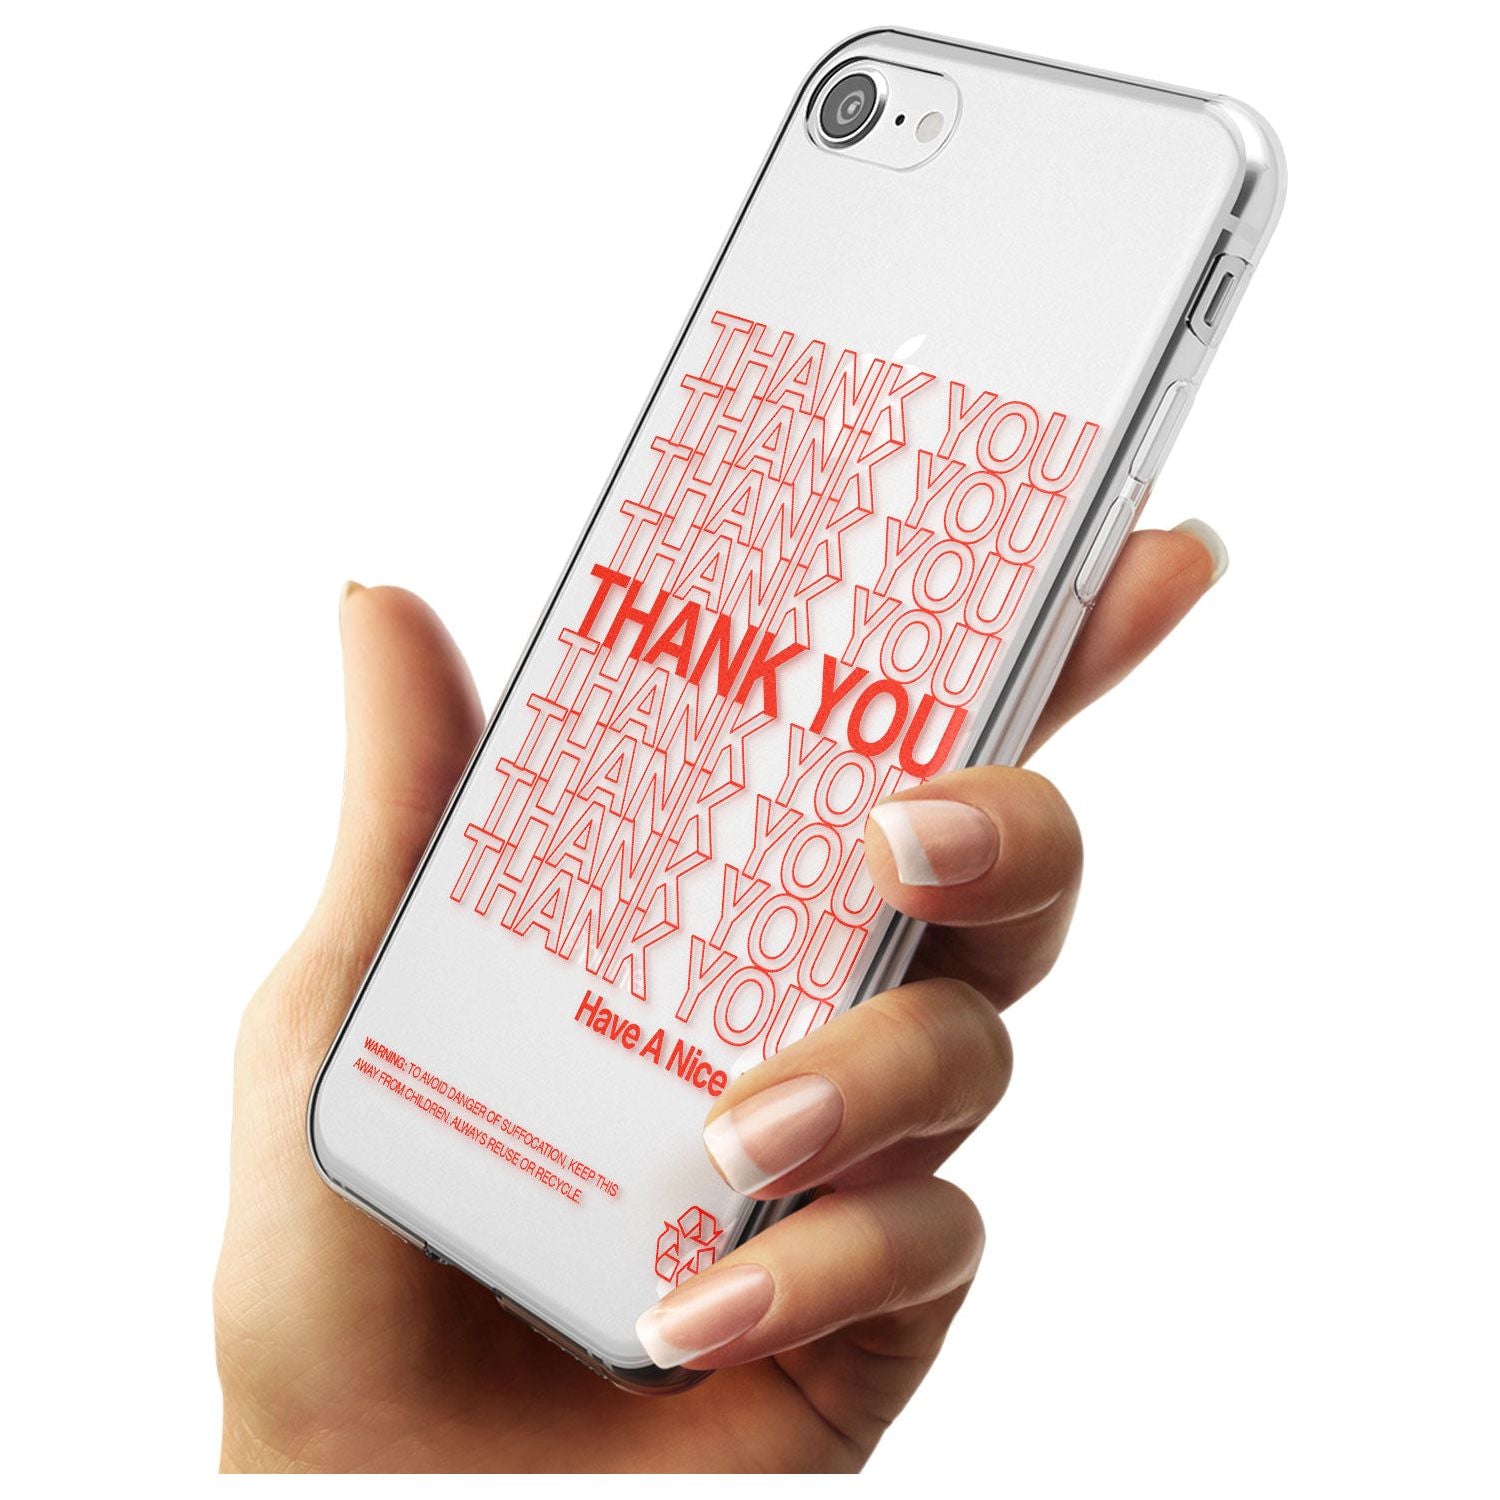 Classic Thank You Bag Design: Solid White + Red Slim TPU Phone Case for iPhone SE 8 7 Plus